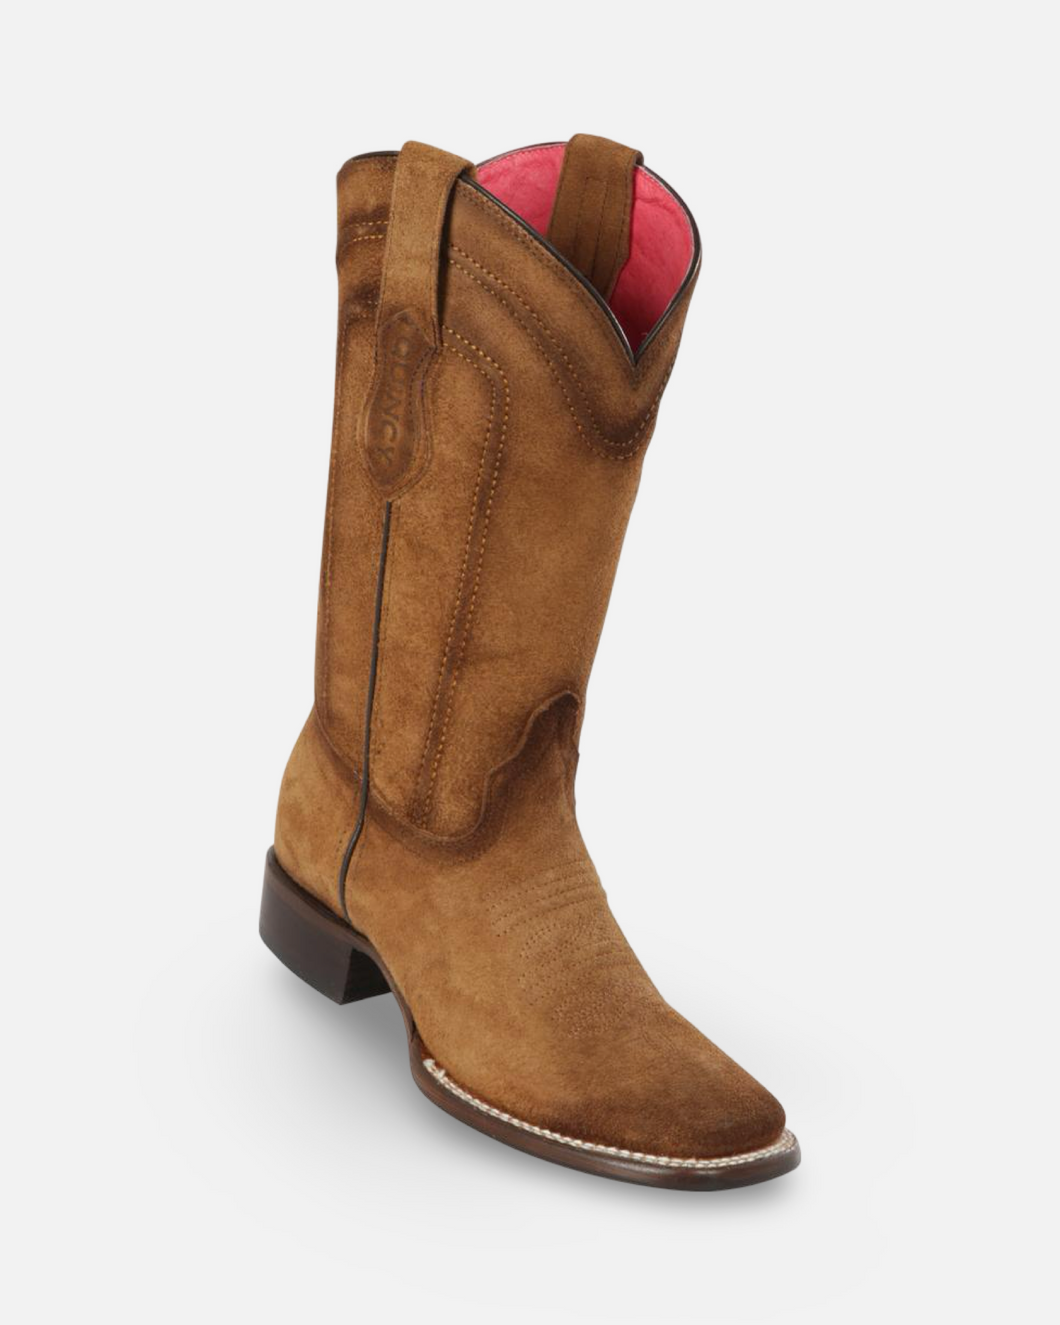 Quincy Boots Tan Suede Leather Wide Square Toe Boot